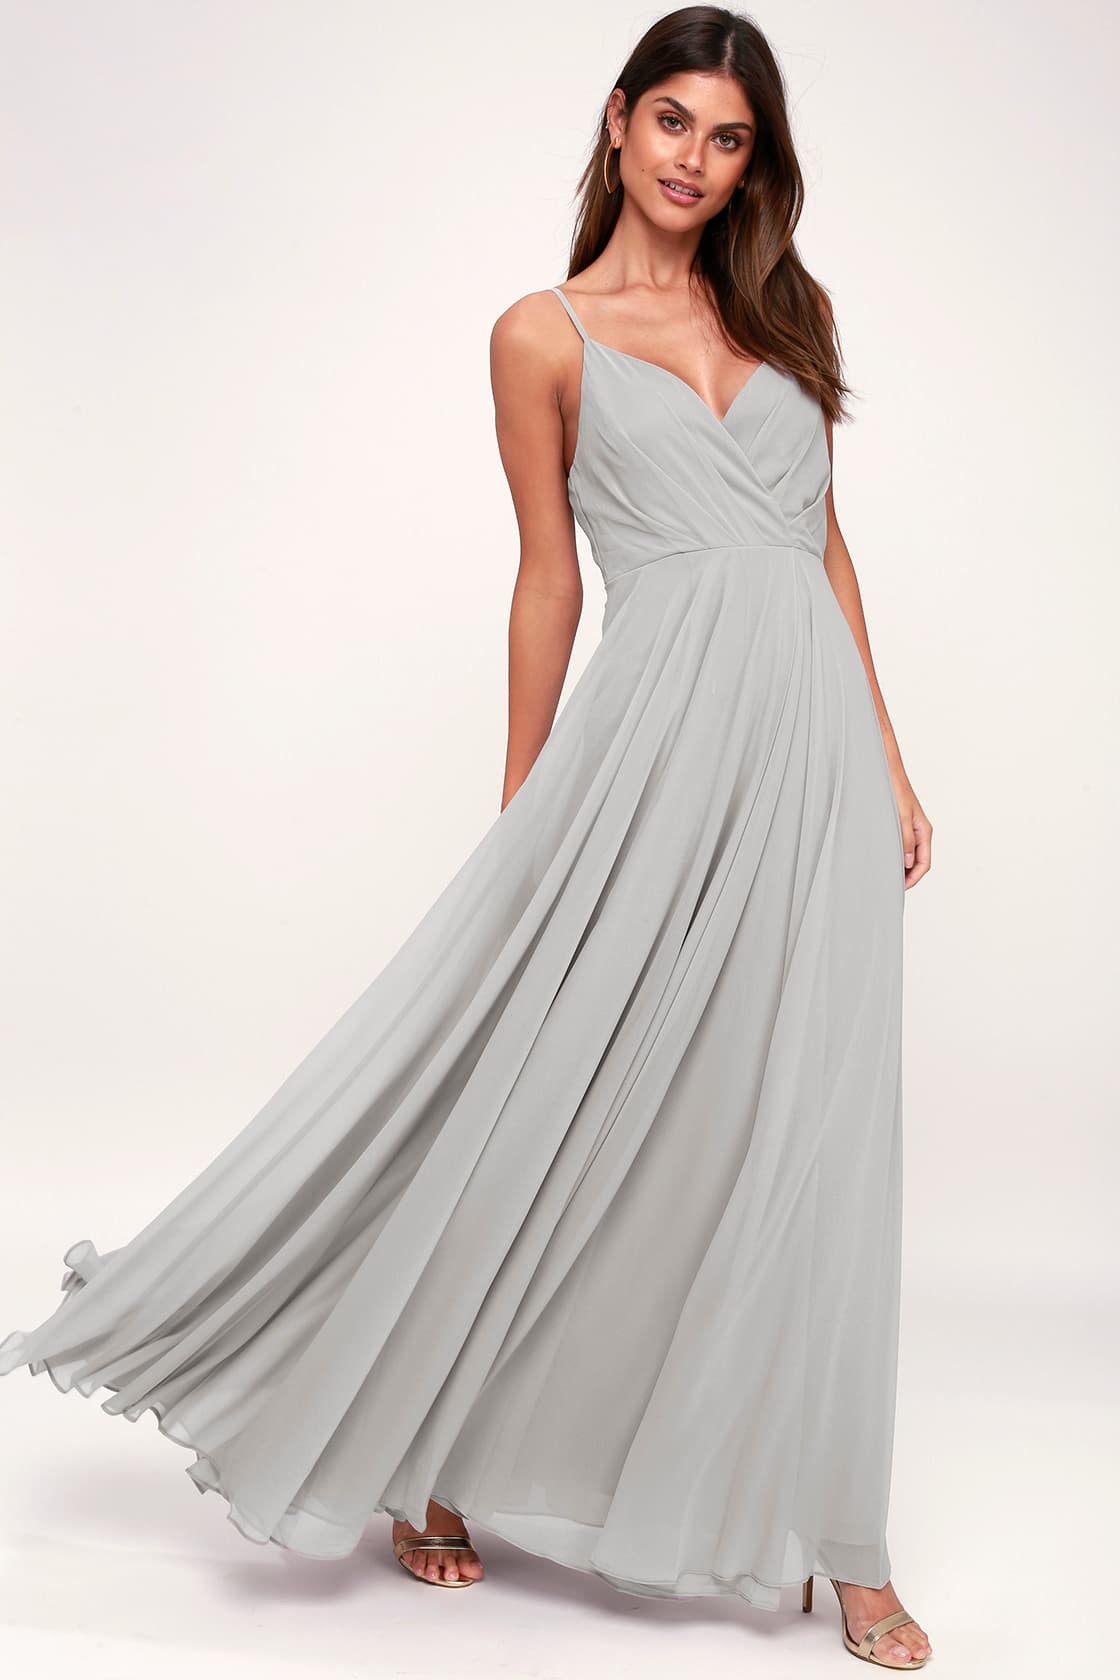 gray dress for wedding party